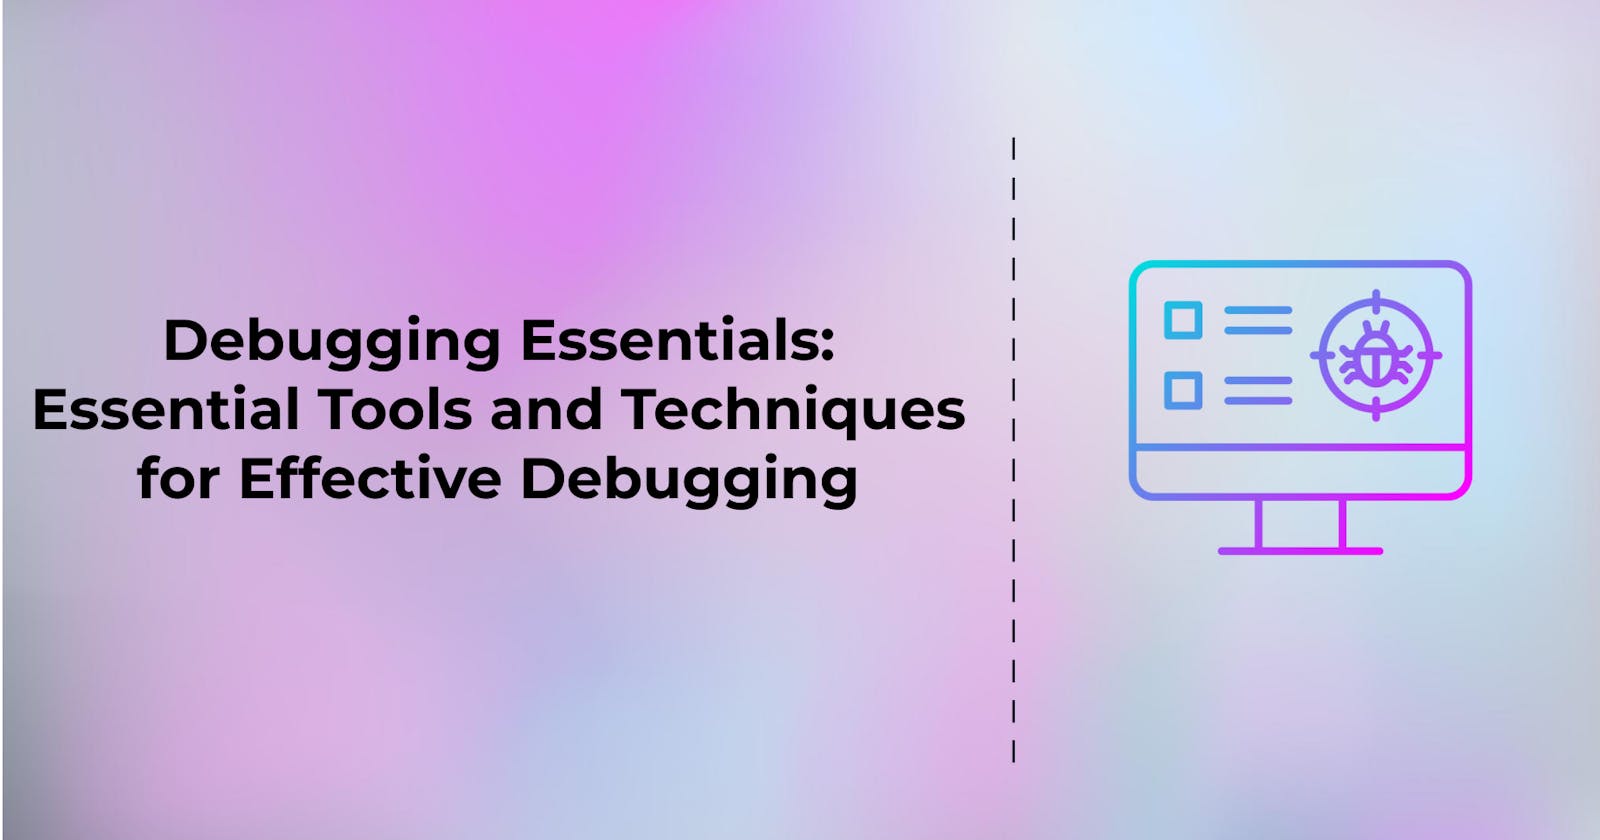 Debugging Essentials: Essential Tools and Techniques for Effective Debugging